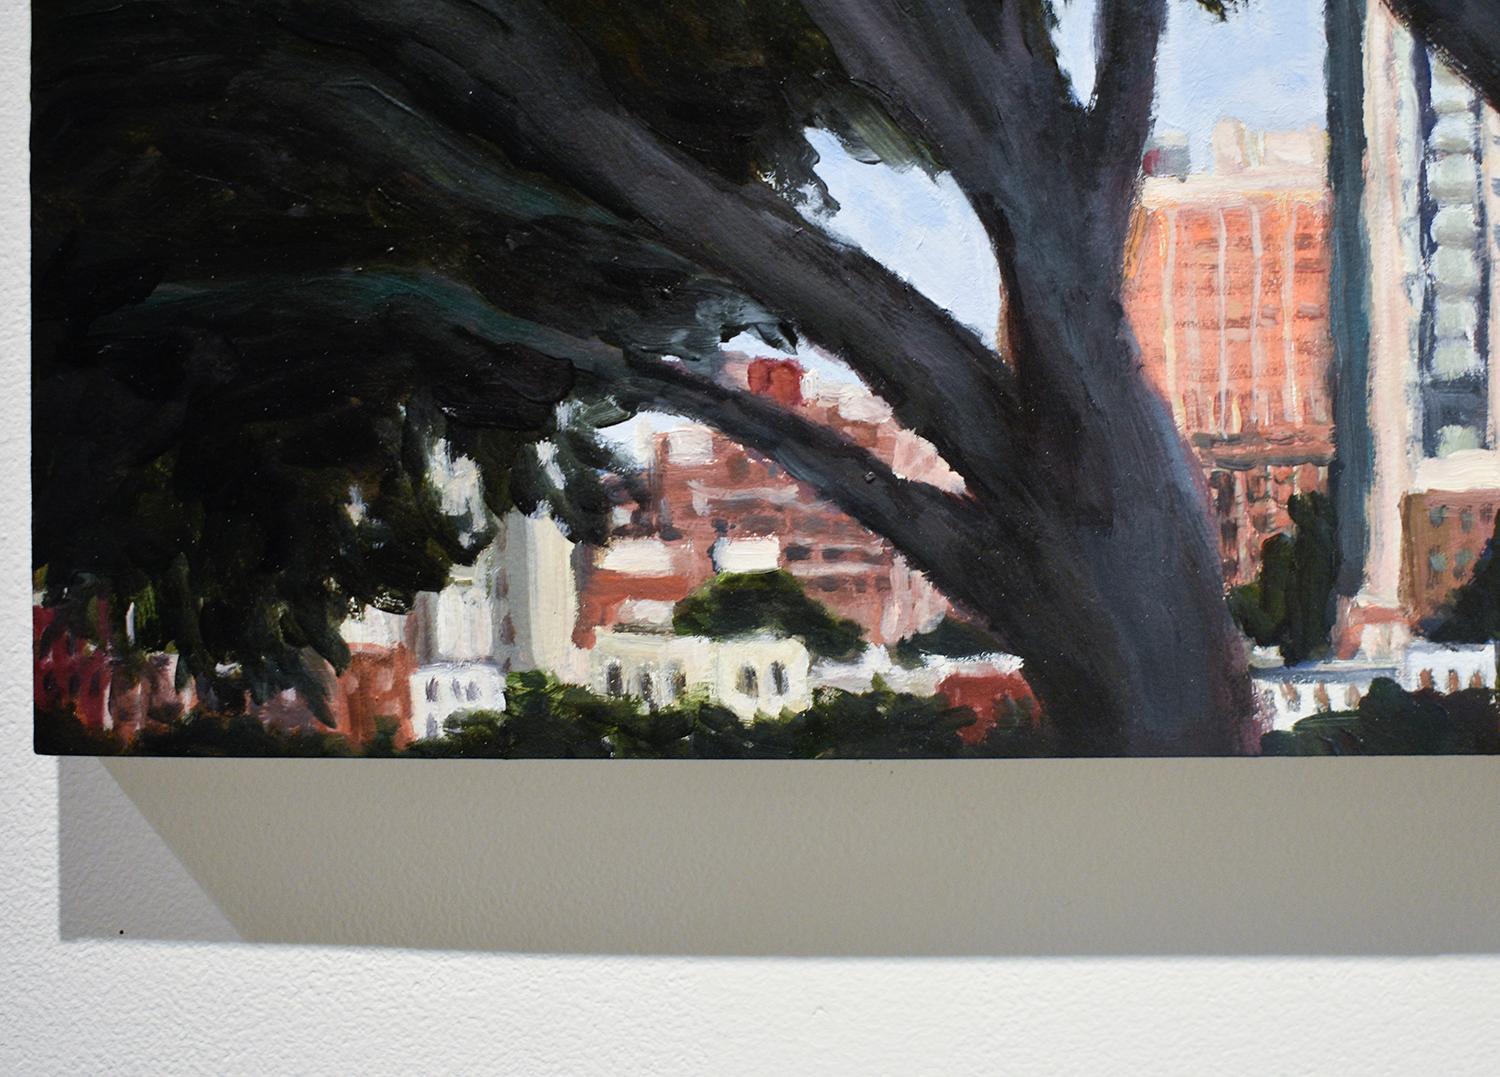 Realist New York City landscape painting as seen through the branches of a dark green tree 
“Brooklyn Through Trees”, painted by Patty Neal in 2019
18